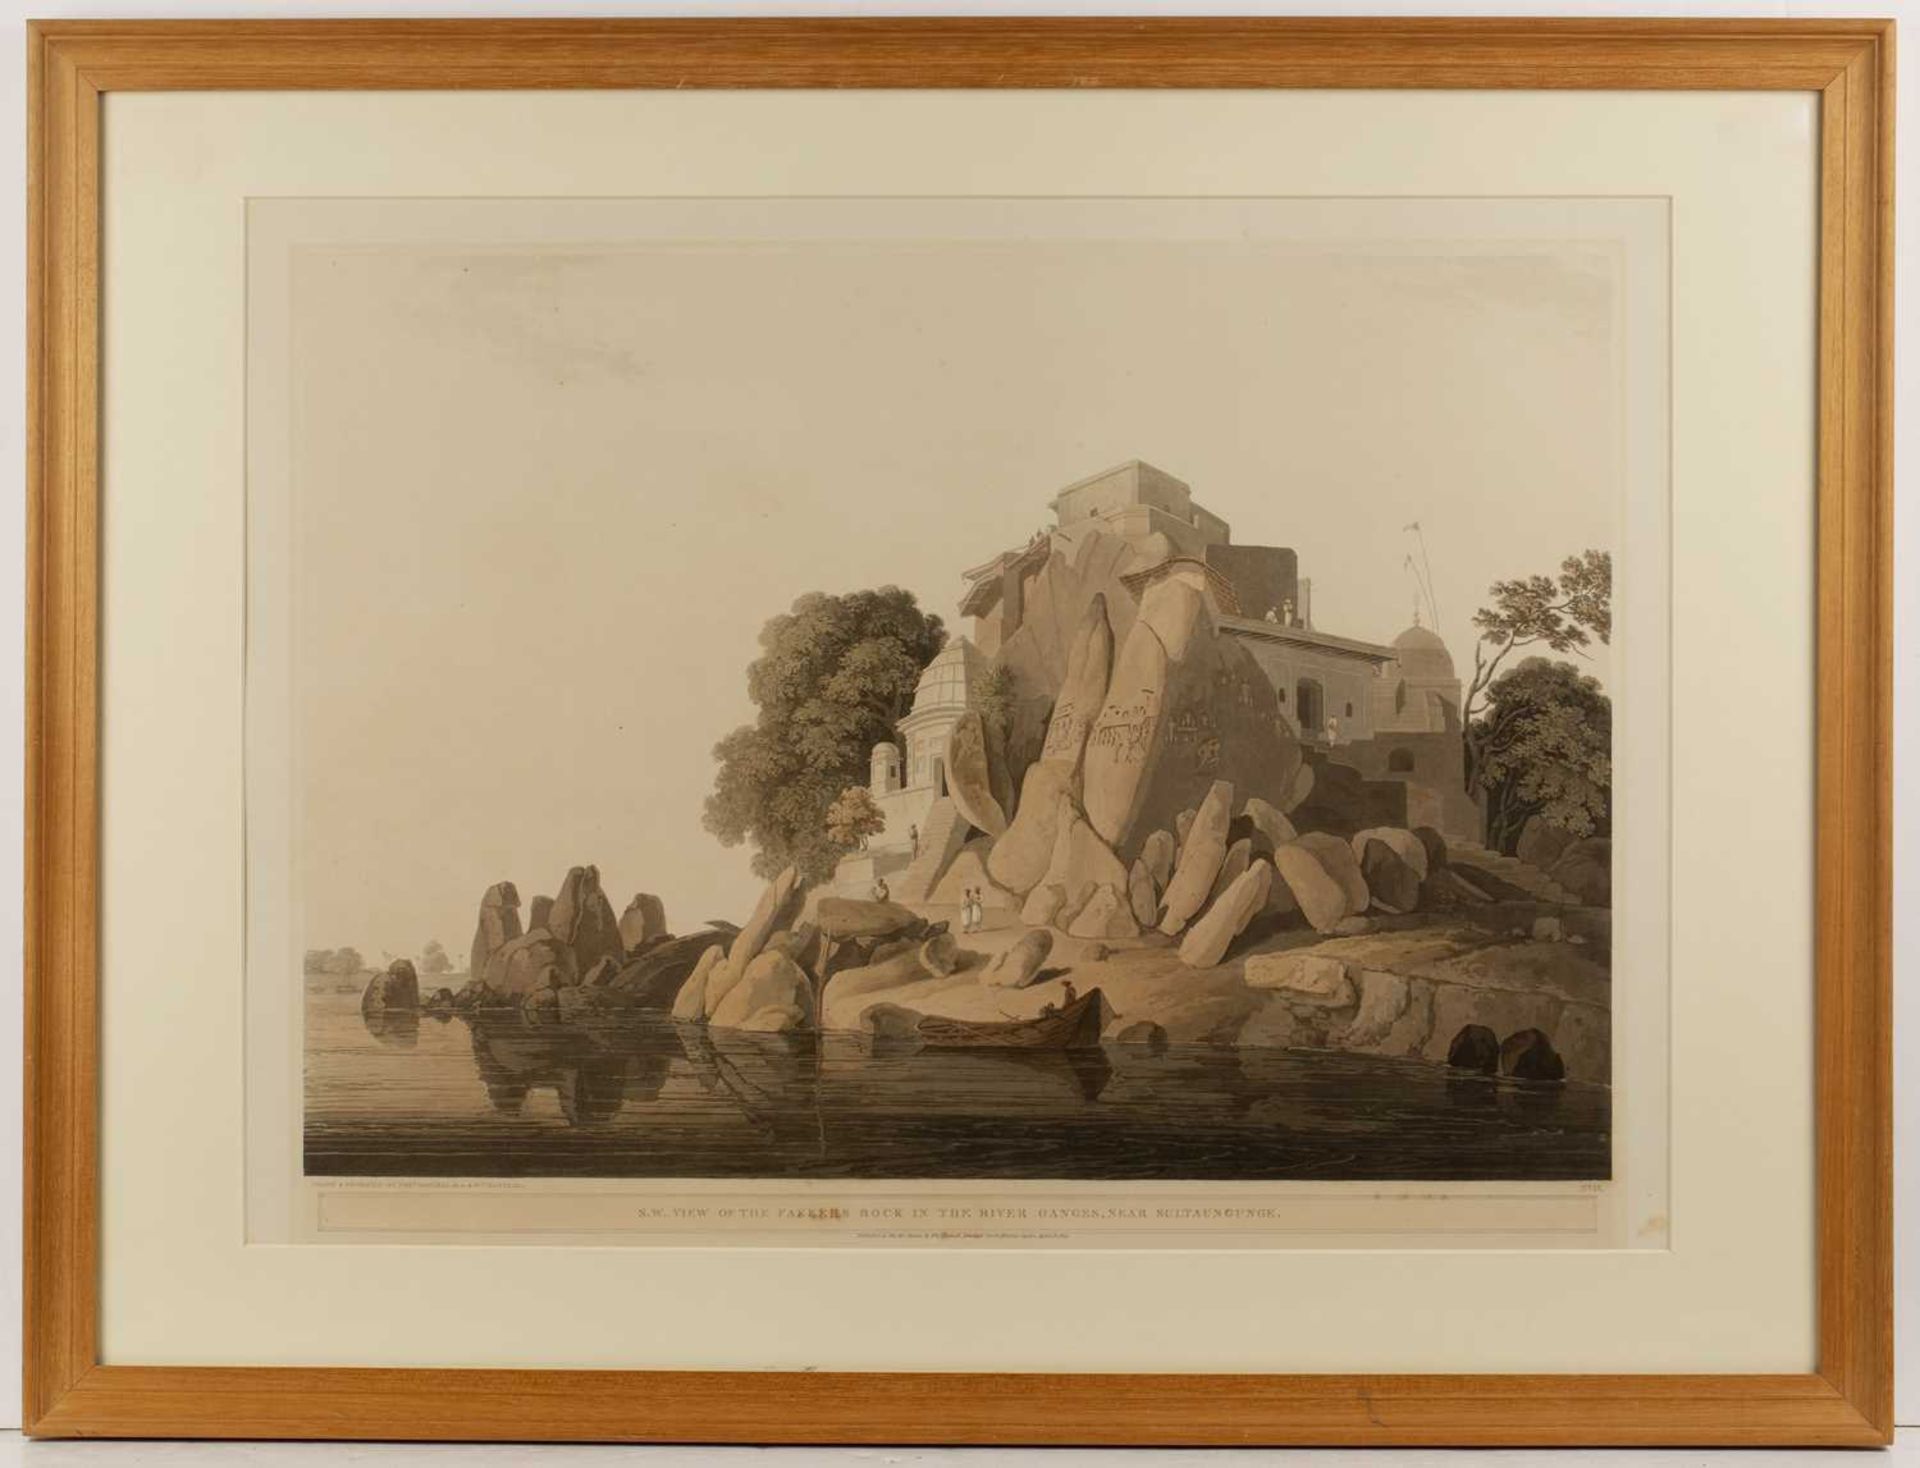 Thomas William Daniell 'S.W. View of the Fakeers Rock in the River Ganges, near Sultanganj', plate - Image 2 of 6